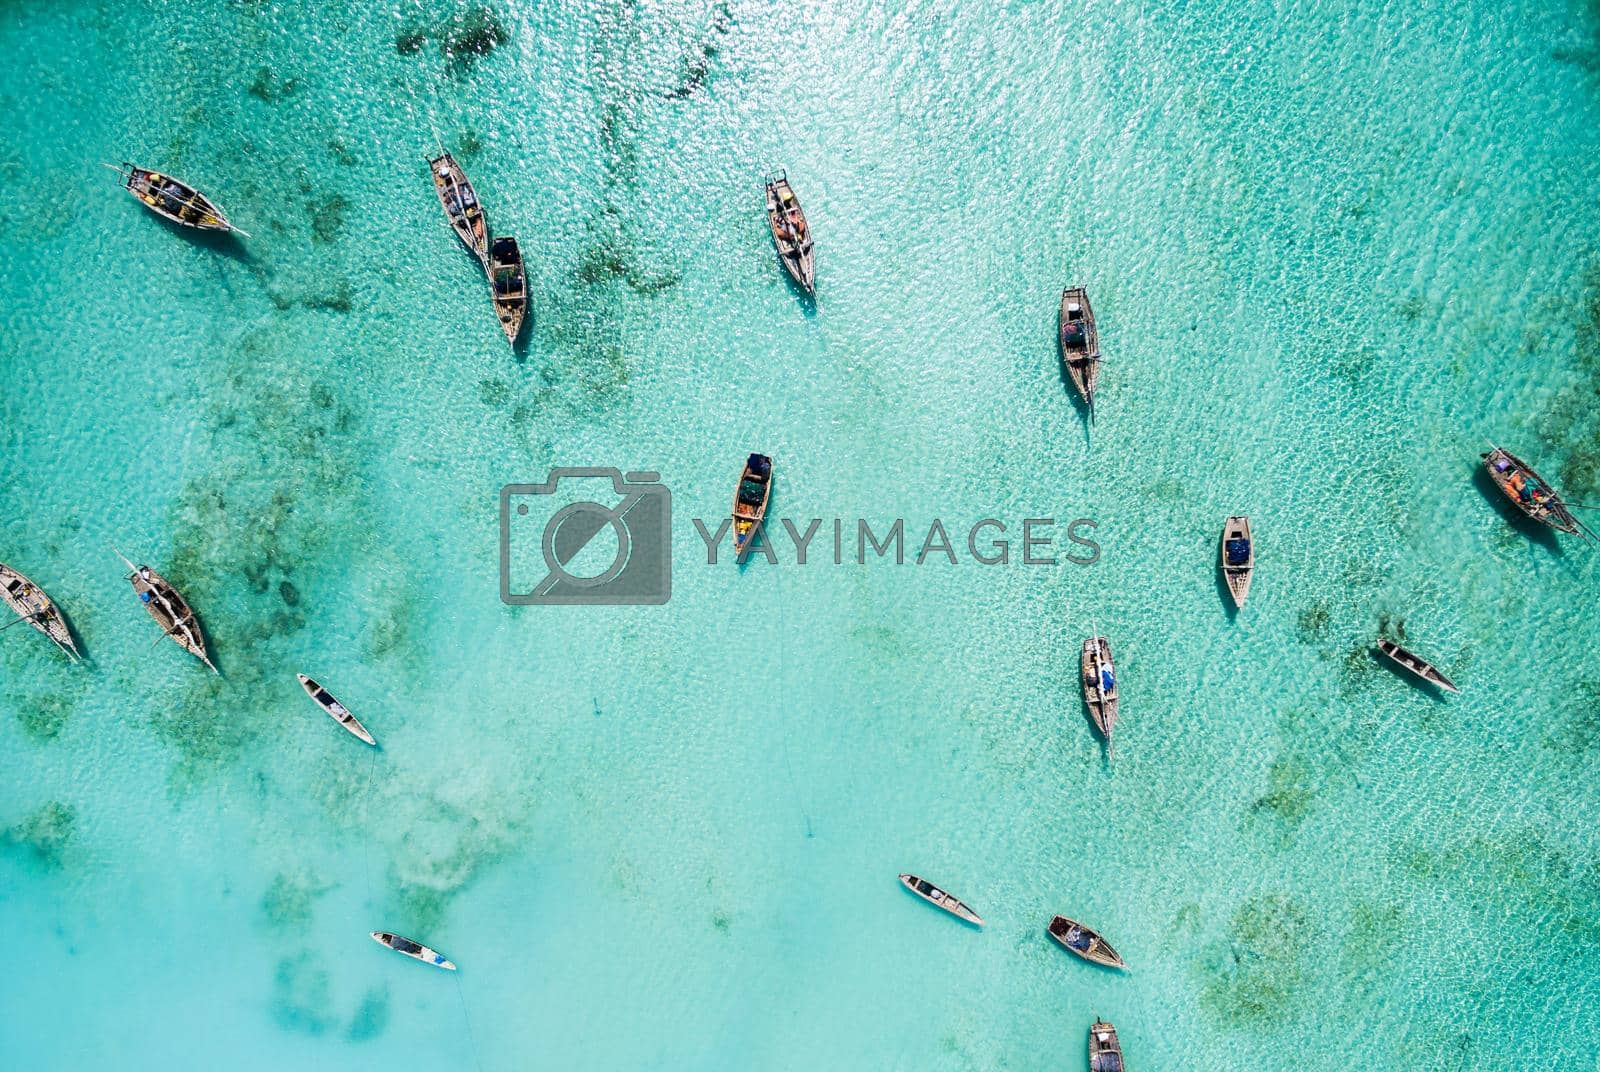 Royalty free image of lots of fishing boats in clear ocean near Africa by GekaSkr